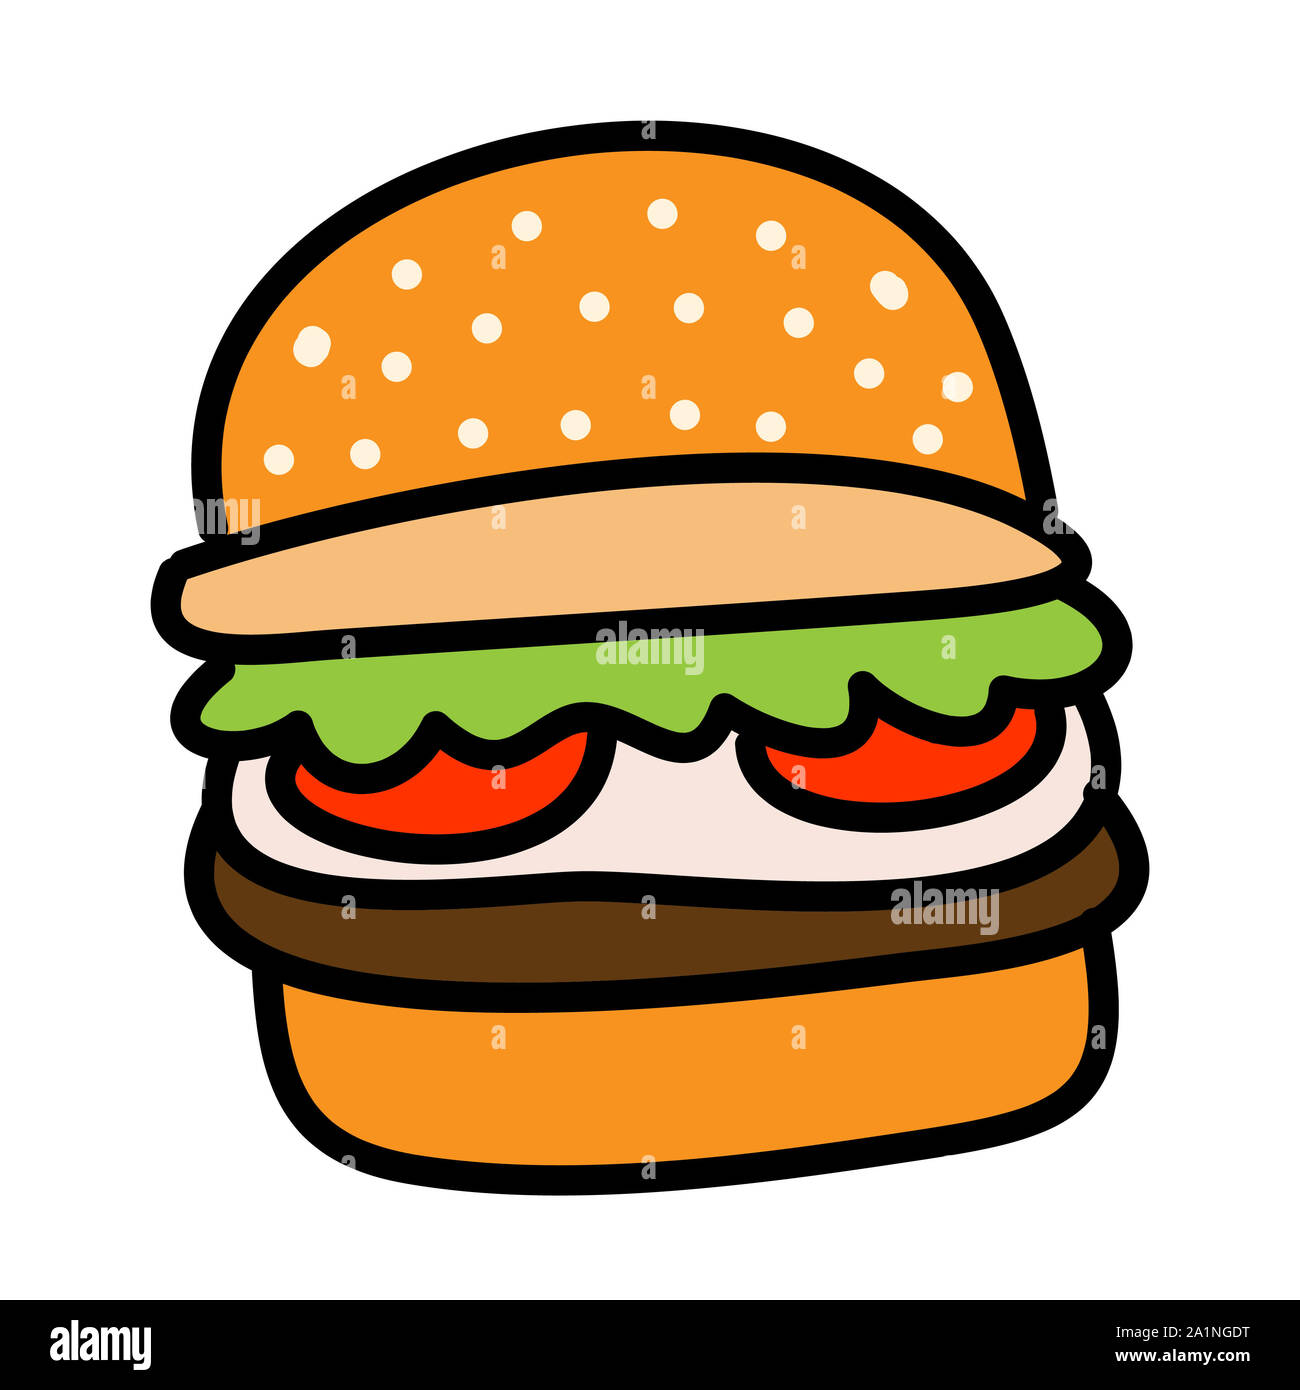 burger icon concept illustration with cartoon flat and doodle style Stock Photo